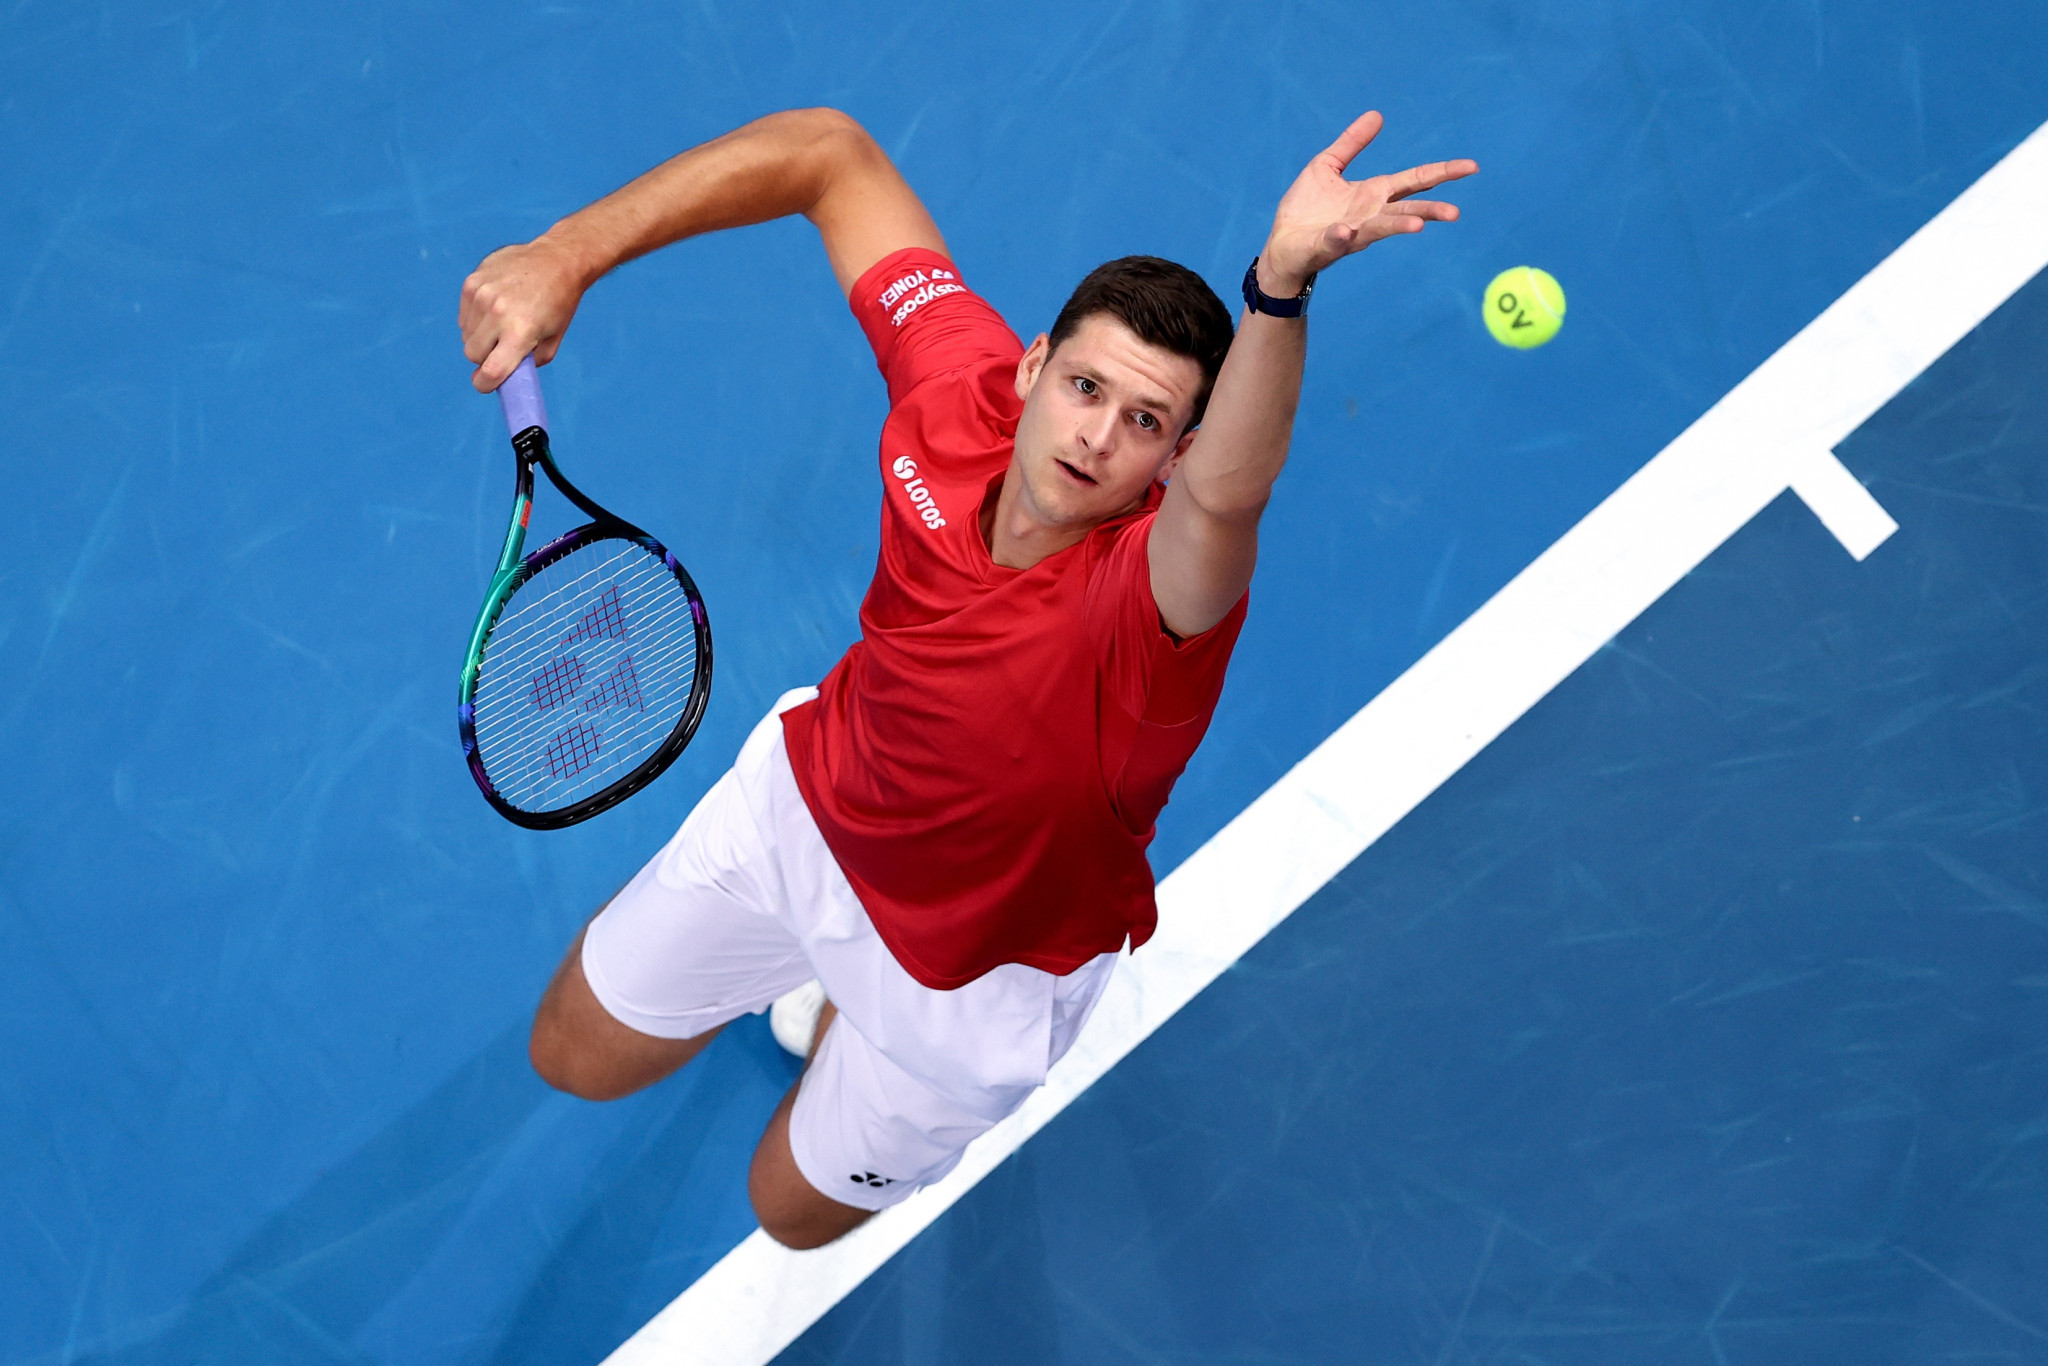 Spain and Poland to meet in ATP Cup semi-finals after more success in Sydney